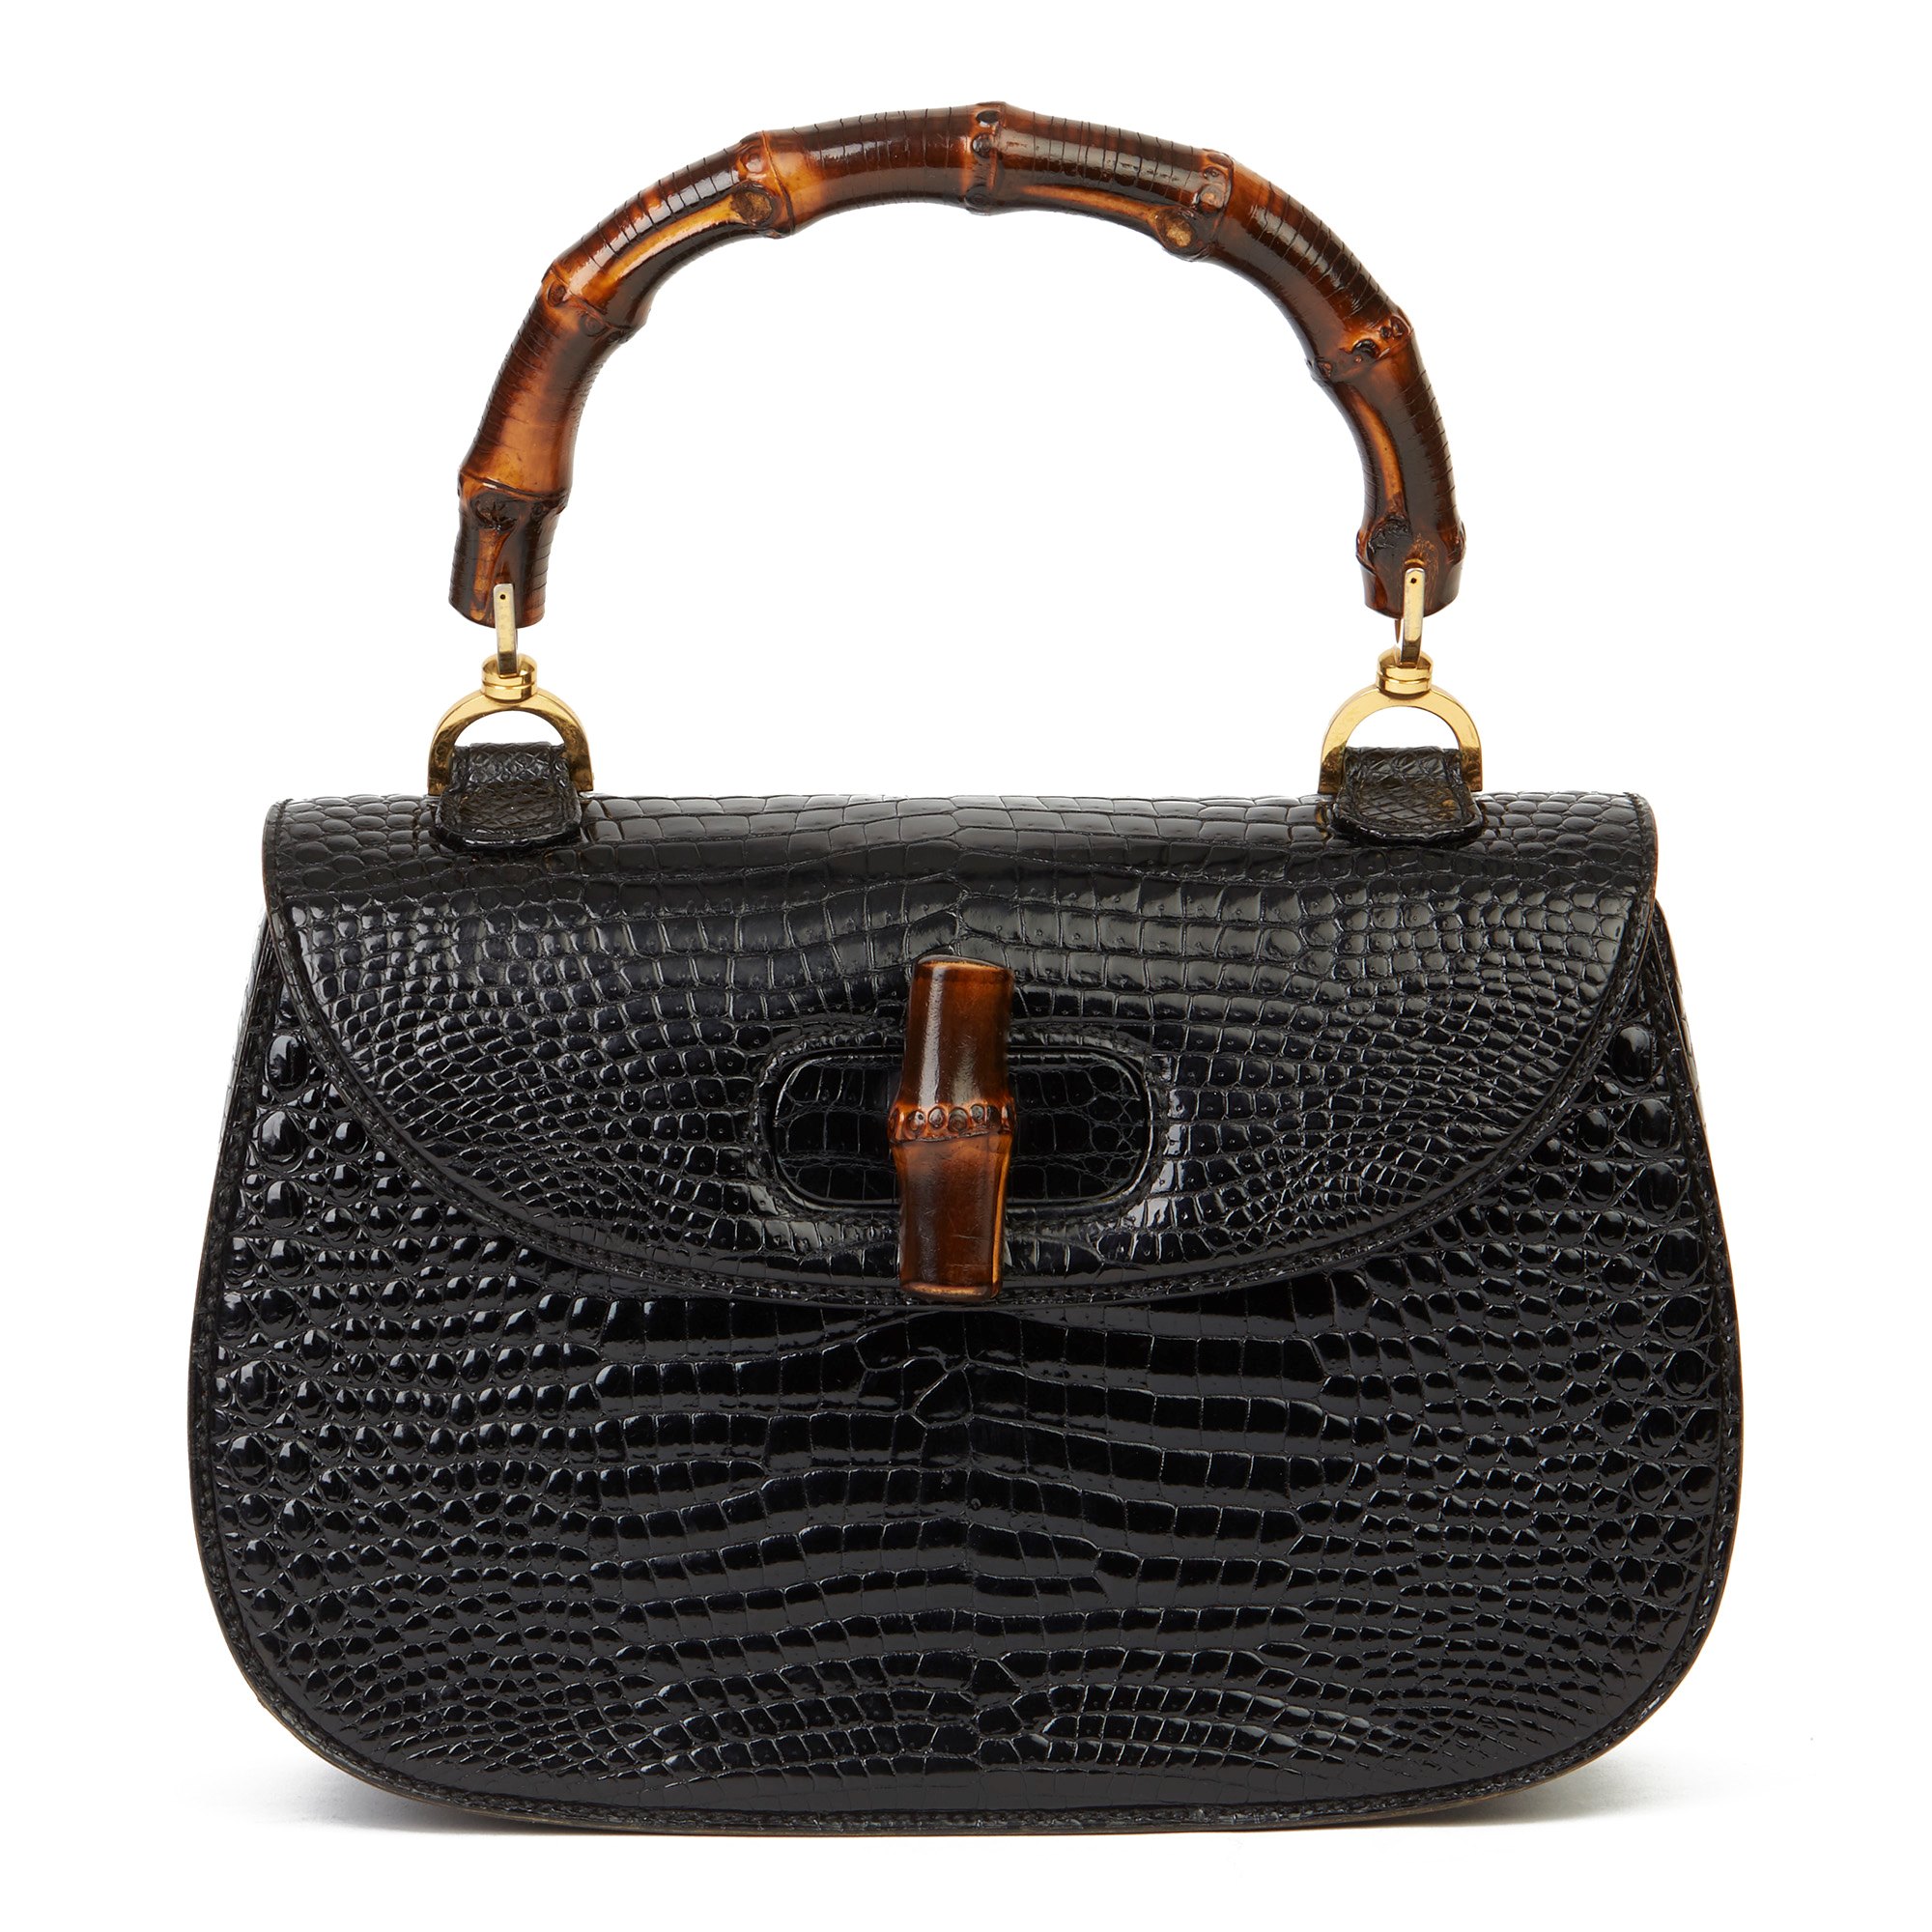 Gucci Black Alligator Leather Bamboo Classic Top Handle